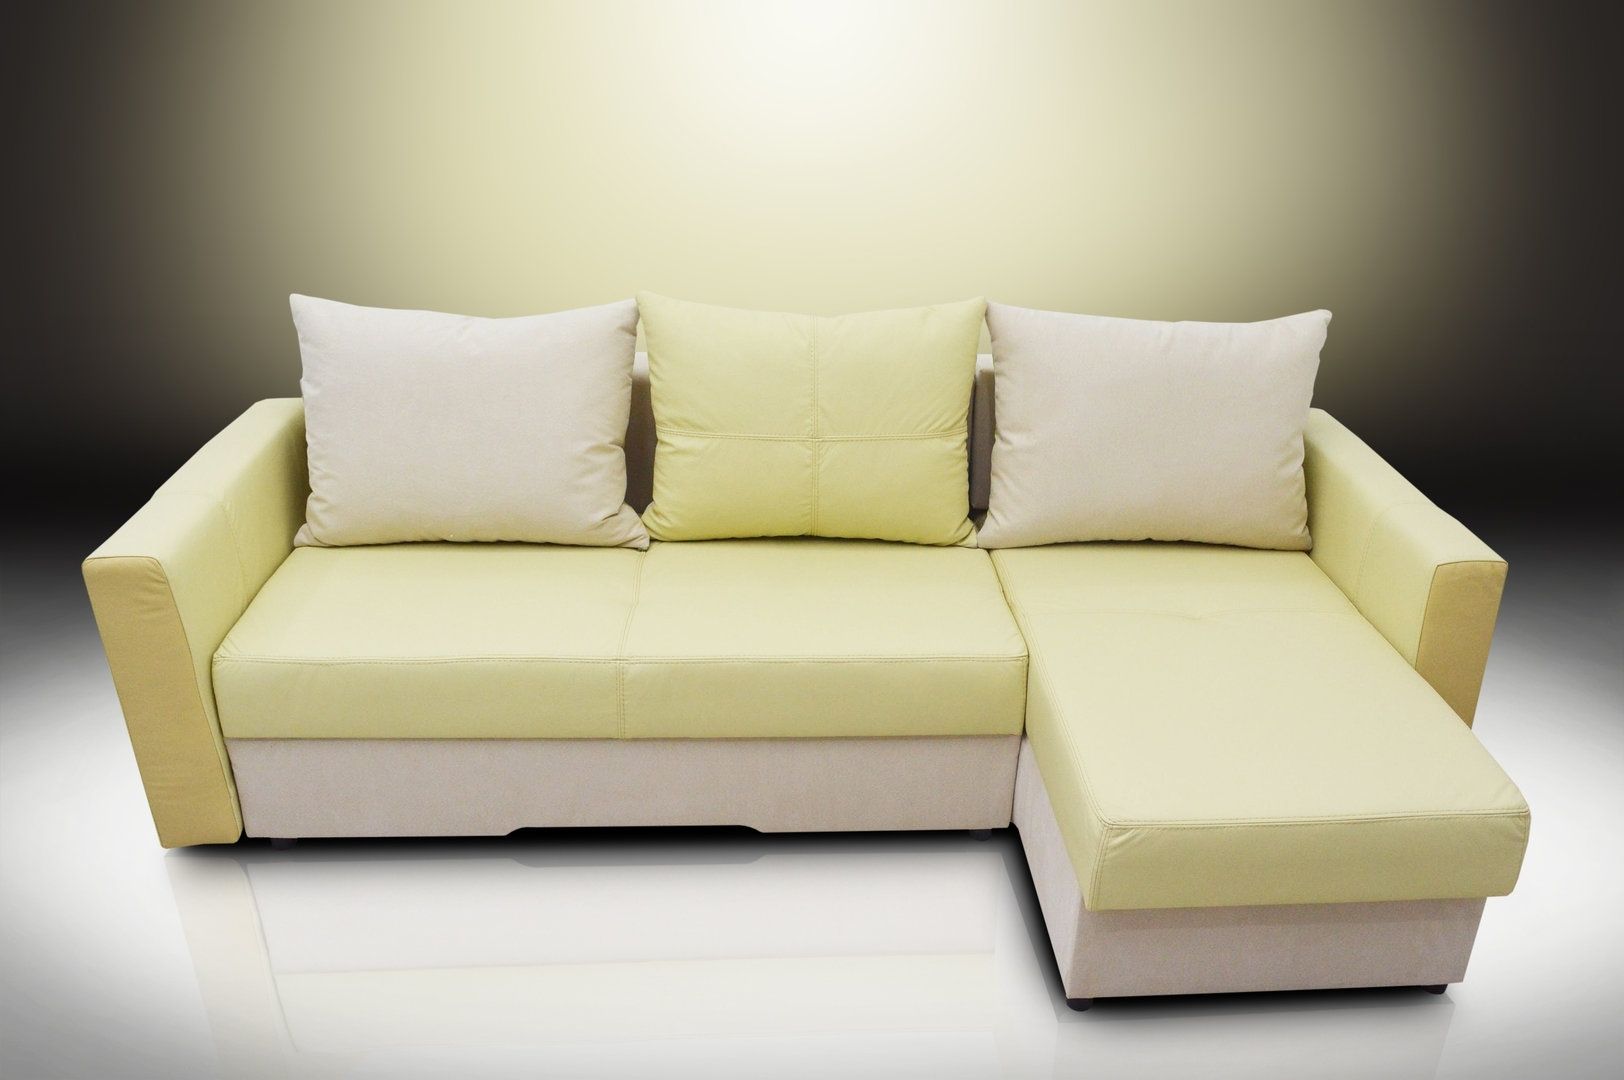 Preferred Faux Suede Sofas With Regard To Real Leather + Faux Suede Fabric Corner Sofa Bed Bristol (View 13 of 15)